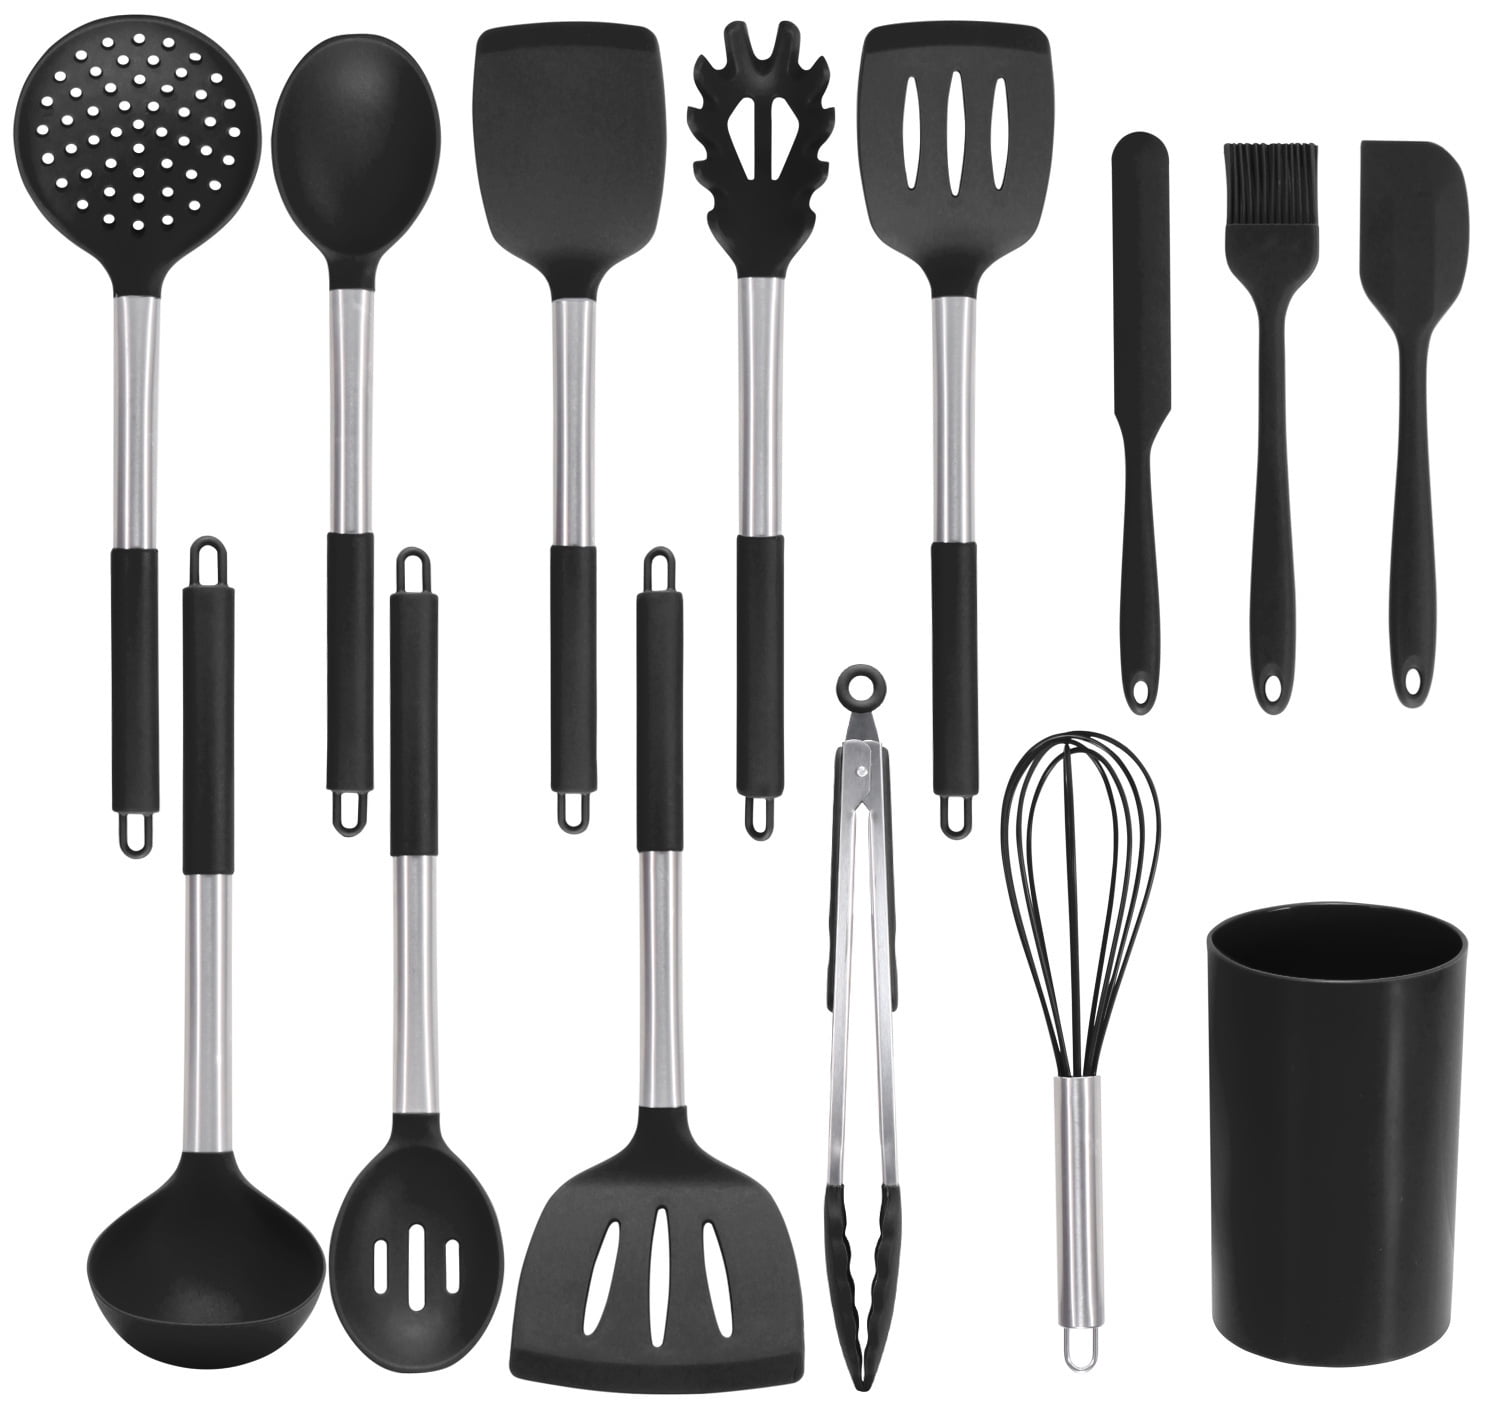 DYD Kitchen Utensils Set Silicone,15 Pcs Kitchen Utensil Premium Quality Cooking Utensil Set,Non-stick Heat Resistant Silicone,Cookware with Stainless Steel Handle,Blue …